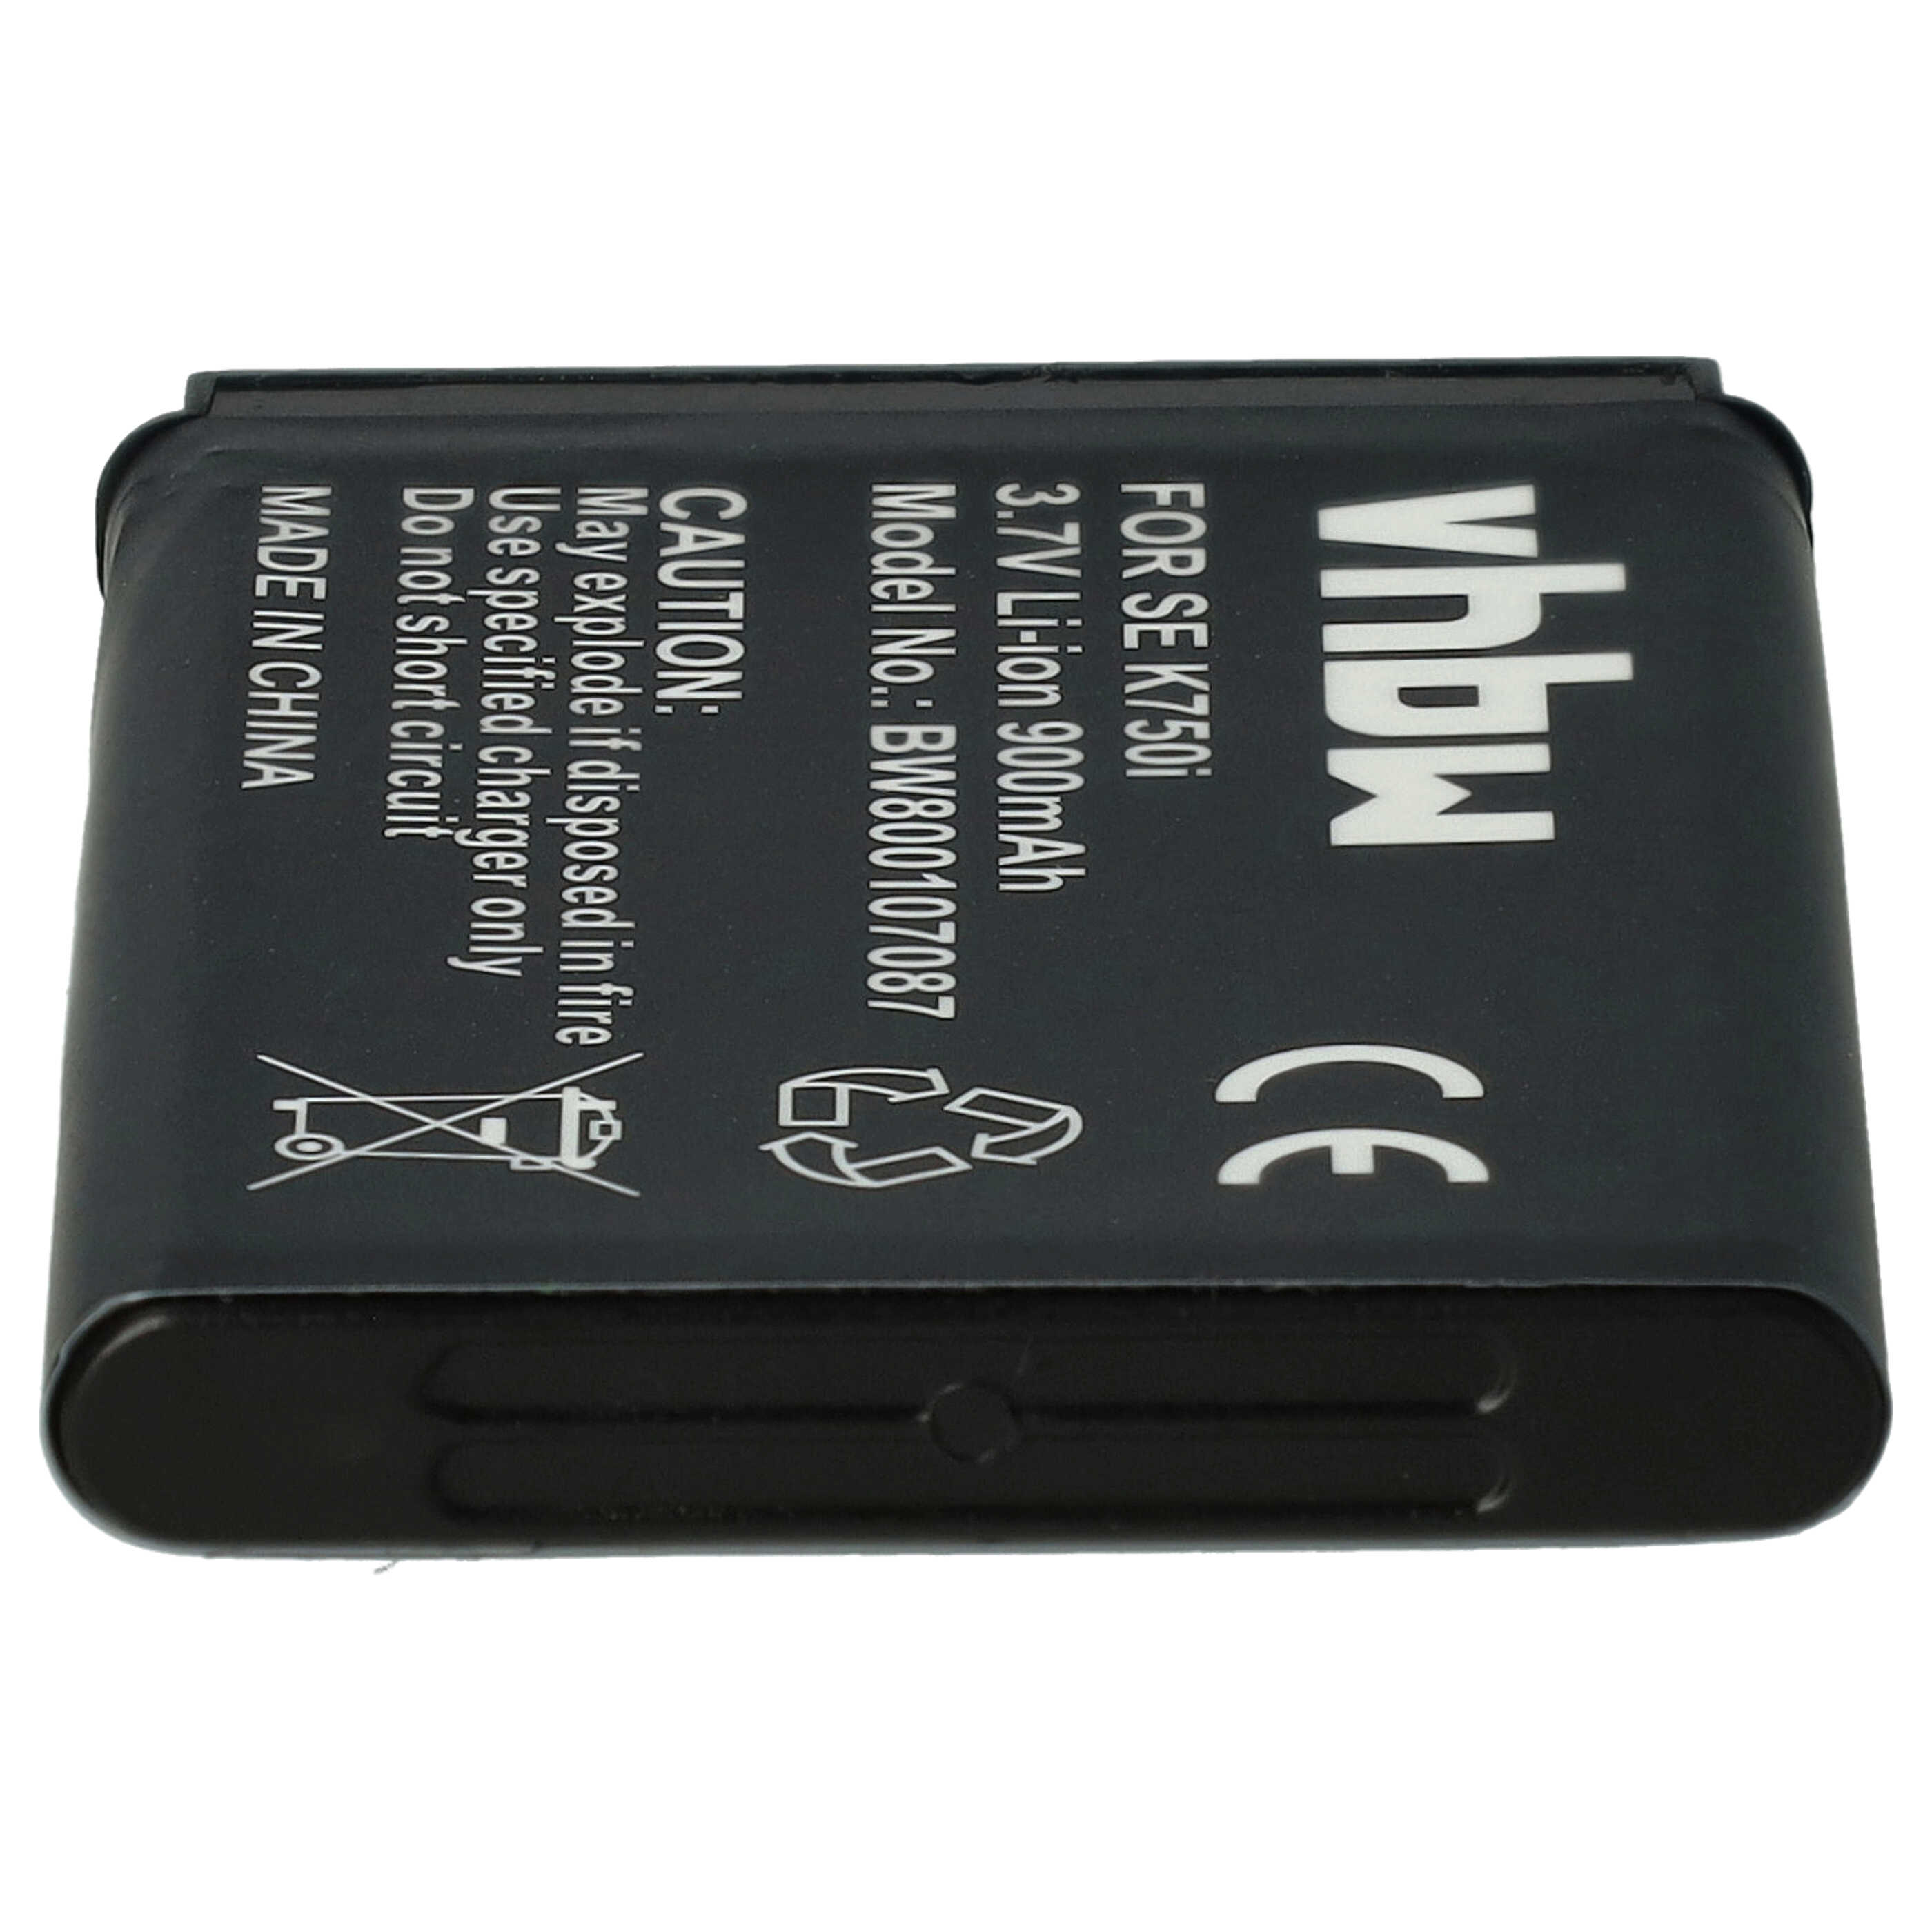 Mobile Phone Battery Replacement for Sony-Ericsson BST-37 - 900mAh 3.7V Li-Ion